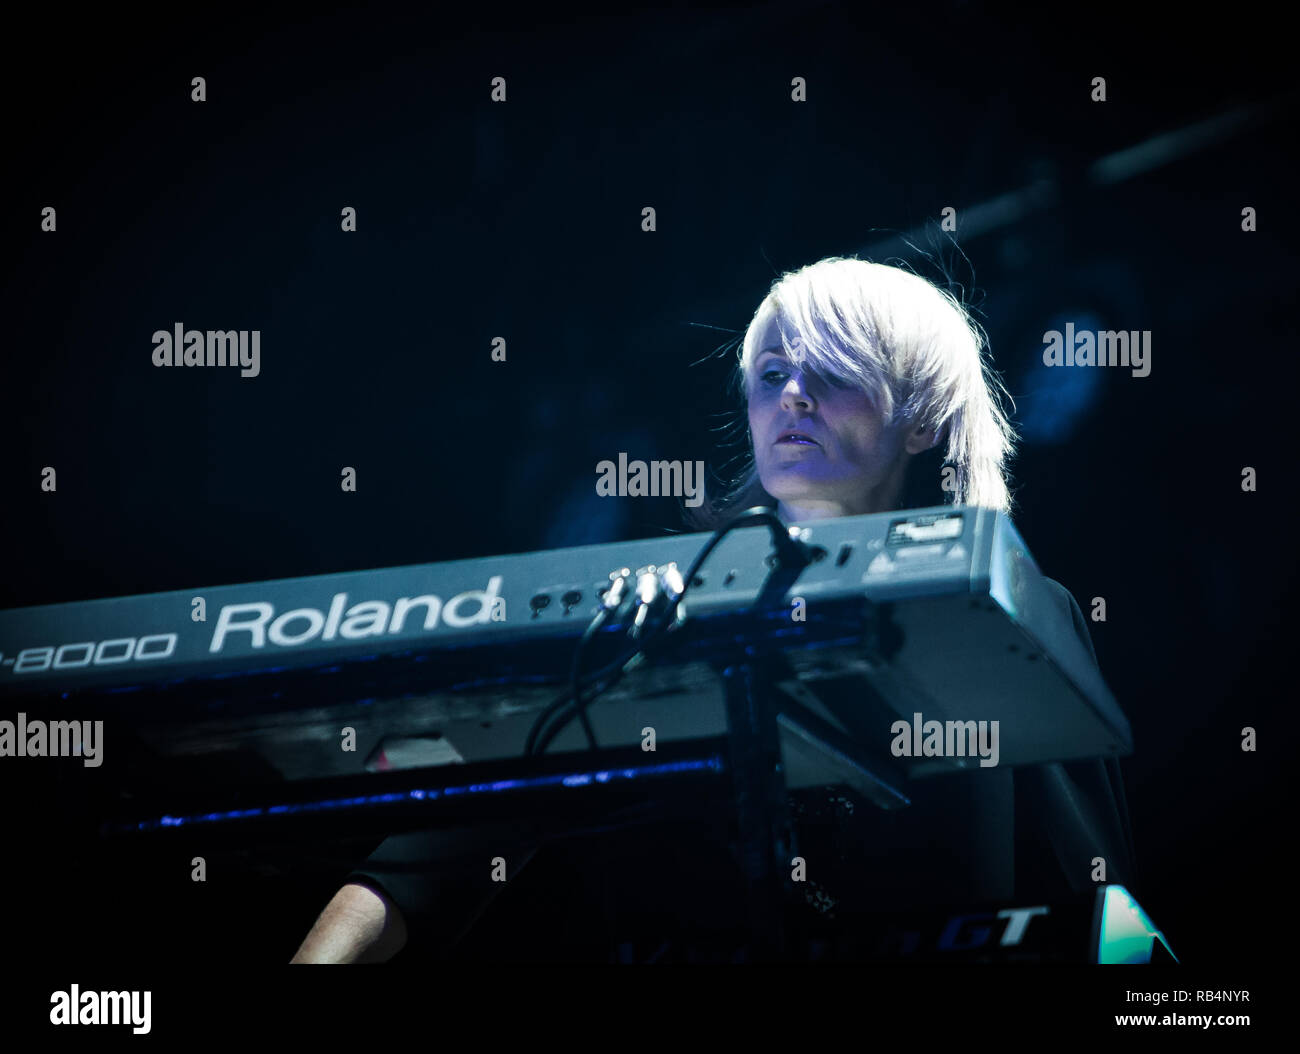 Faithless, the British electronica band, performs a live concert at the Danish music festival Tinderbox Festival 2015 in Odense. Here keyboardist Sister Bliss is seen live on stage. Denmark, 27/06 2015. EXCLUDING DENMARK. Stock Photo